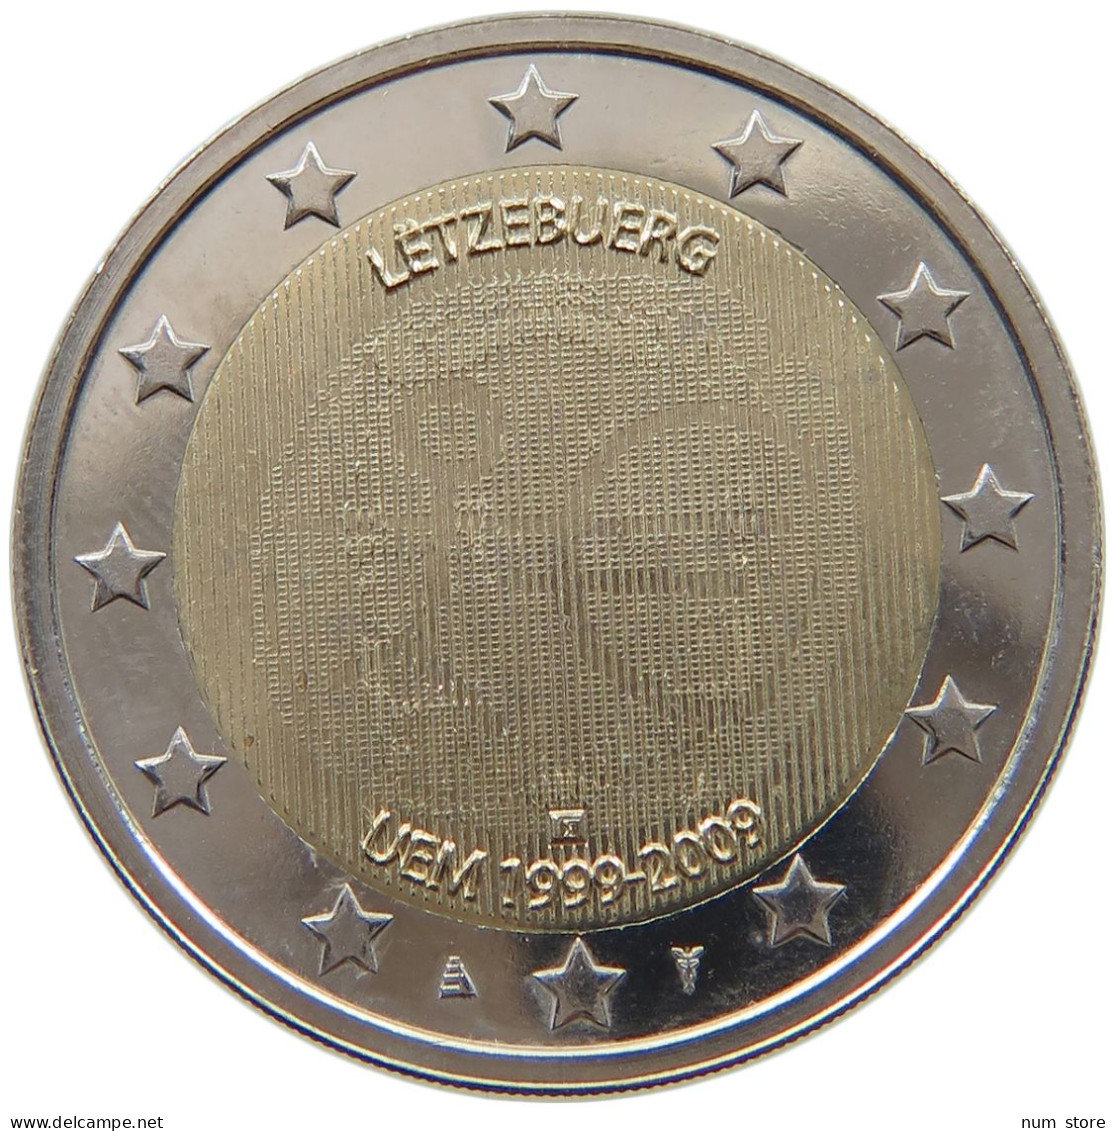 LUXEMBOURG 2 EURO 2009 #c053 0373 - Luxembourg